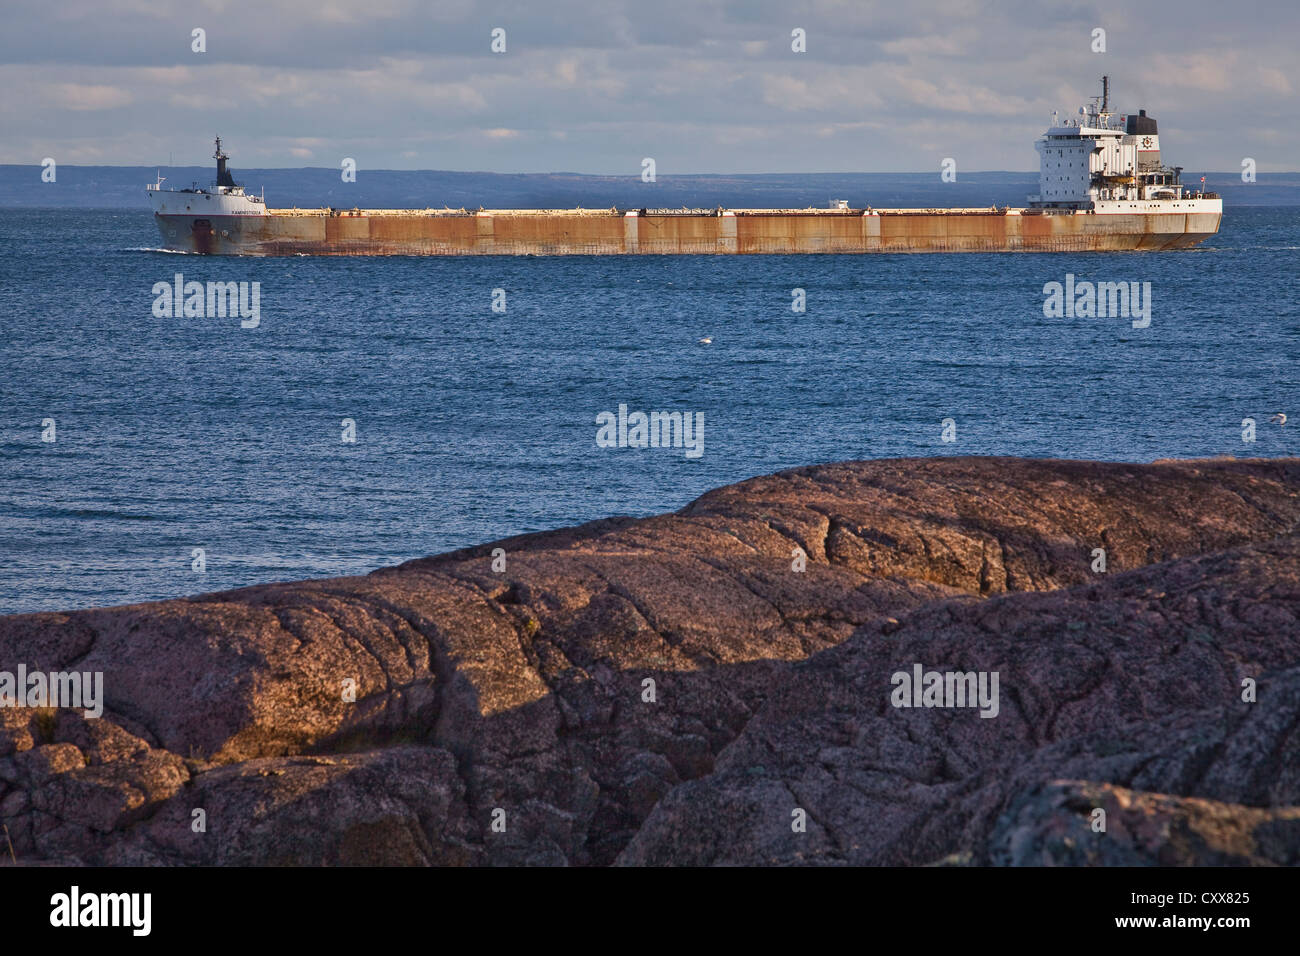 The Kaministiqua bulk Carrier, property of Lower Lake Towing, is seen sailing on the St. Lawrence river Stock Photo